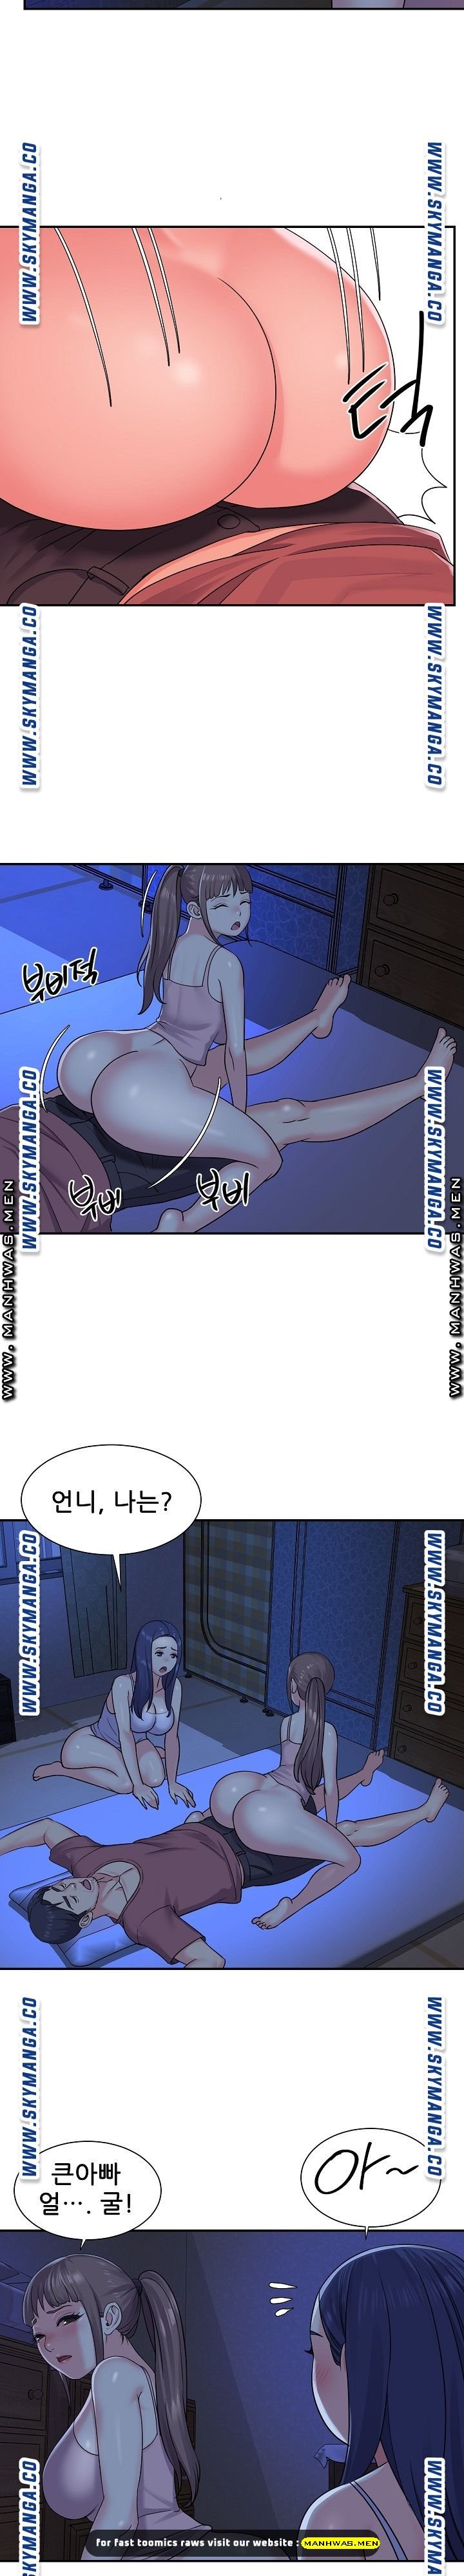 two-sisters-raw-chap-8-11